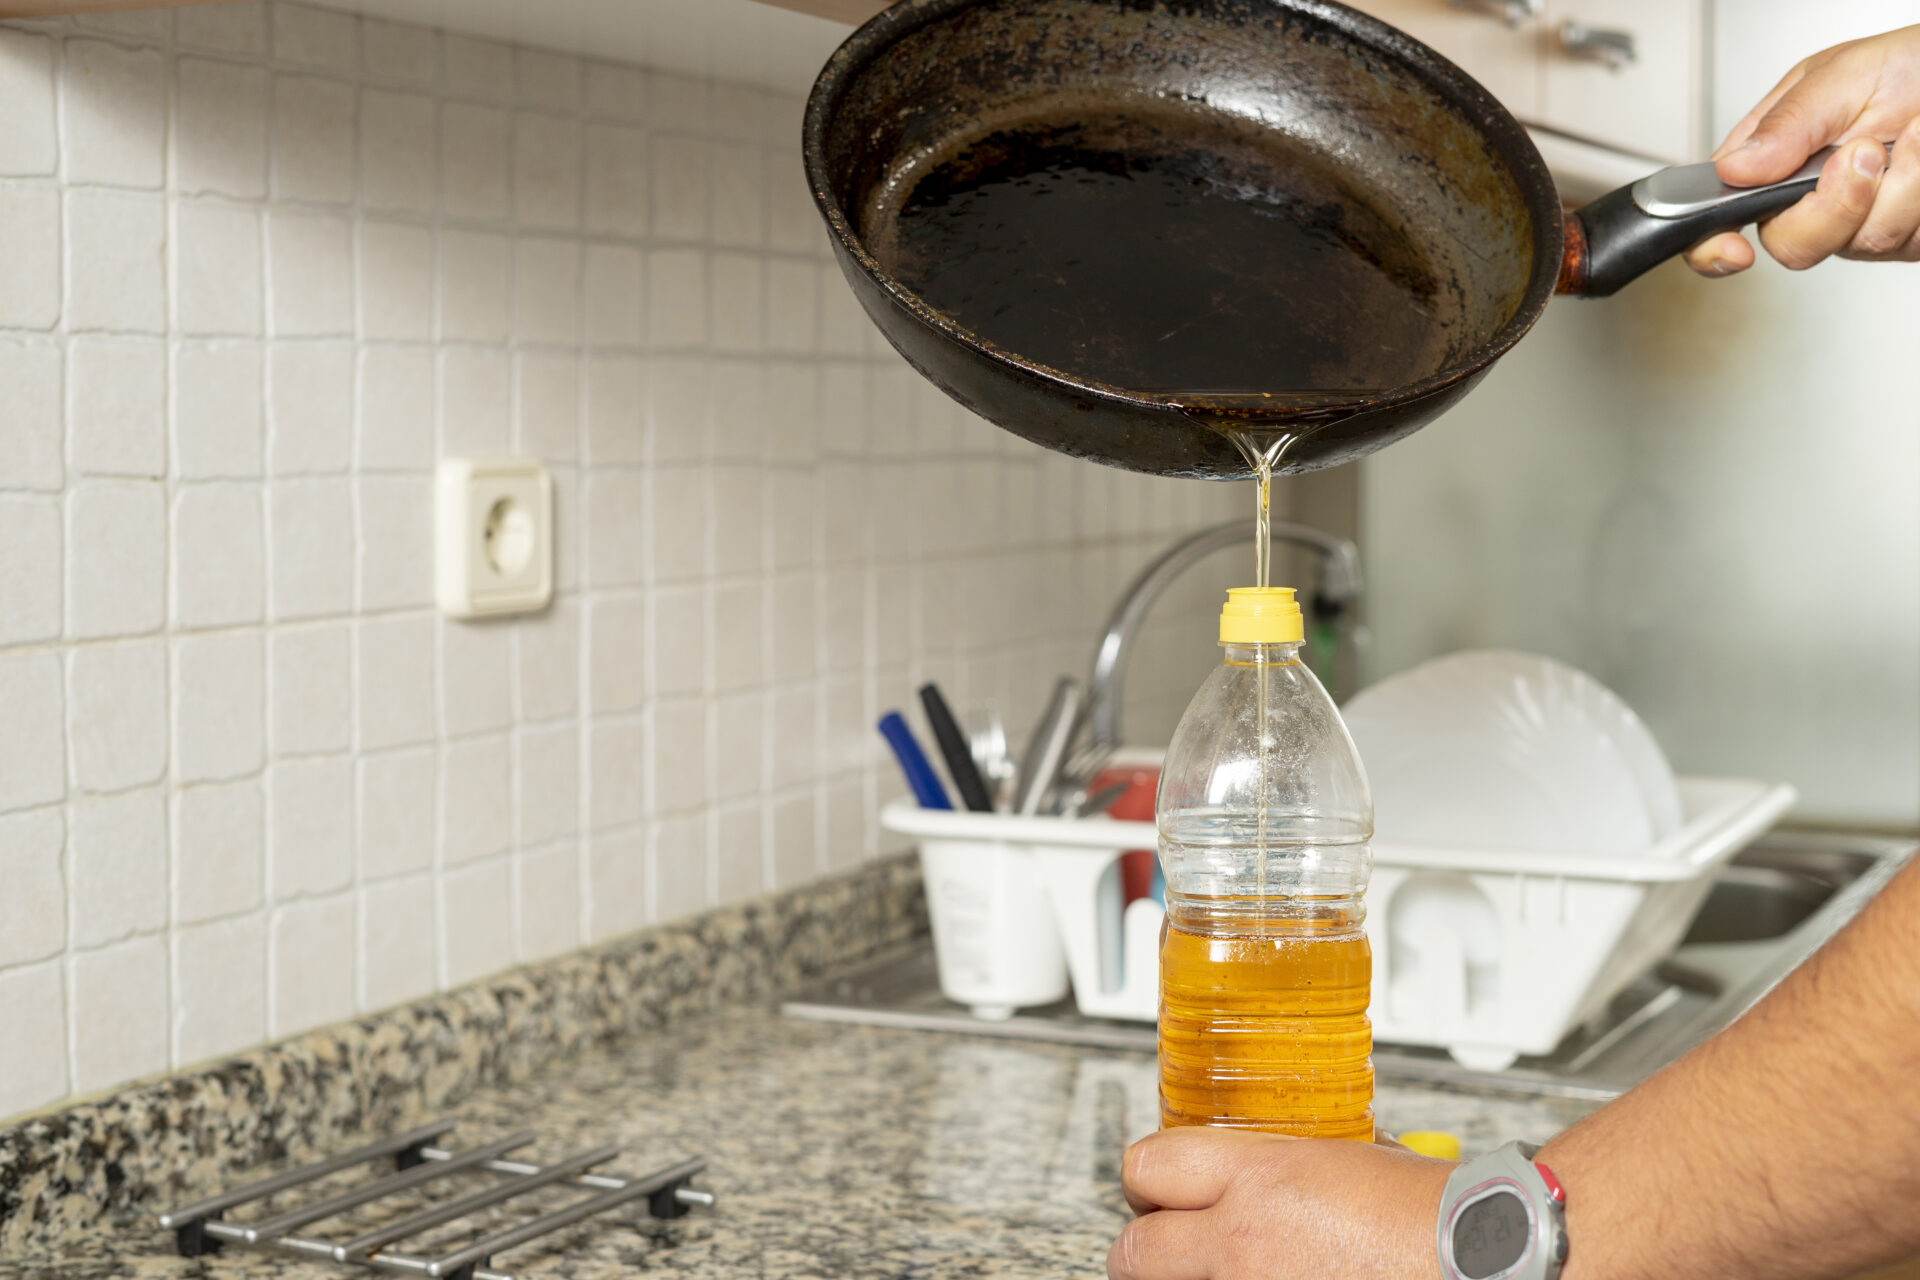 Man placing recycled used cooking oil from a frying pan into a plastic bottle in their kitchen. MidCity Plumbers.